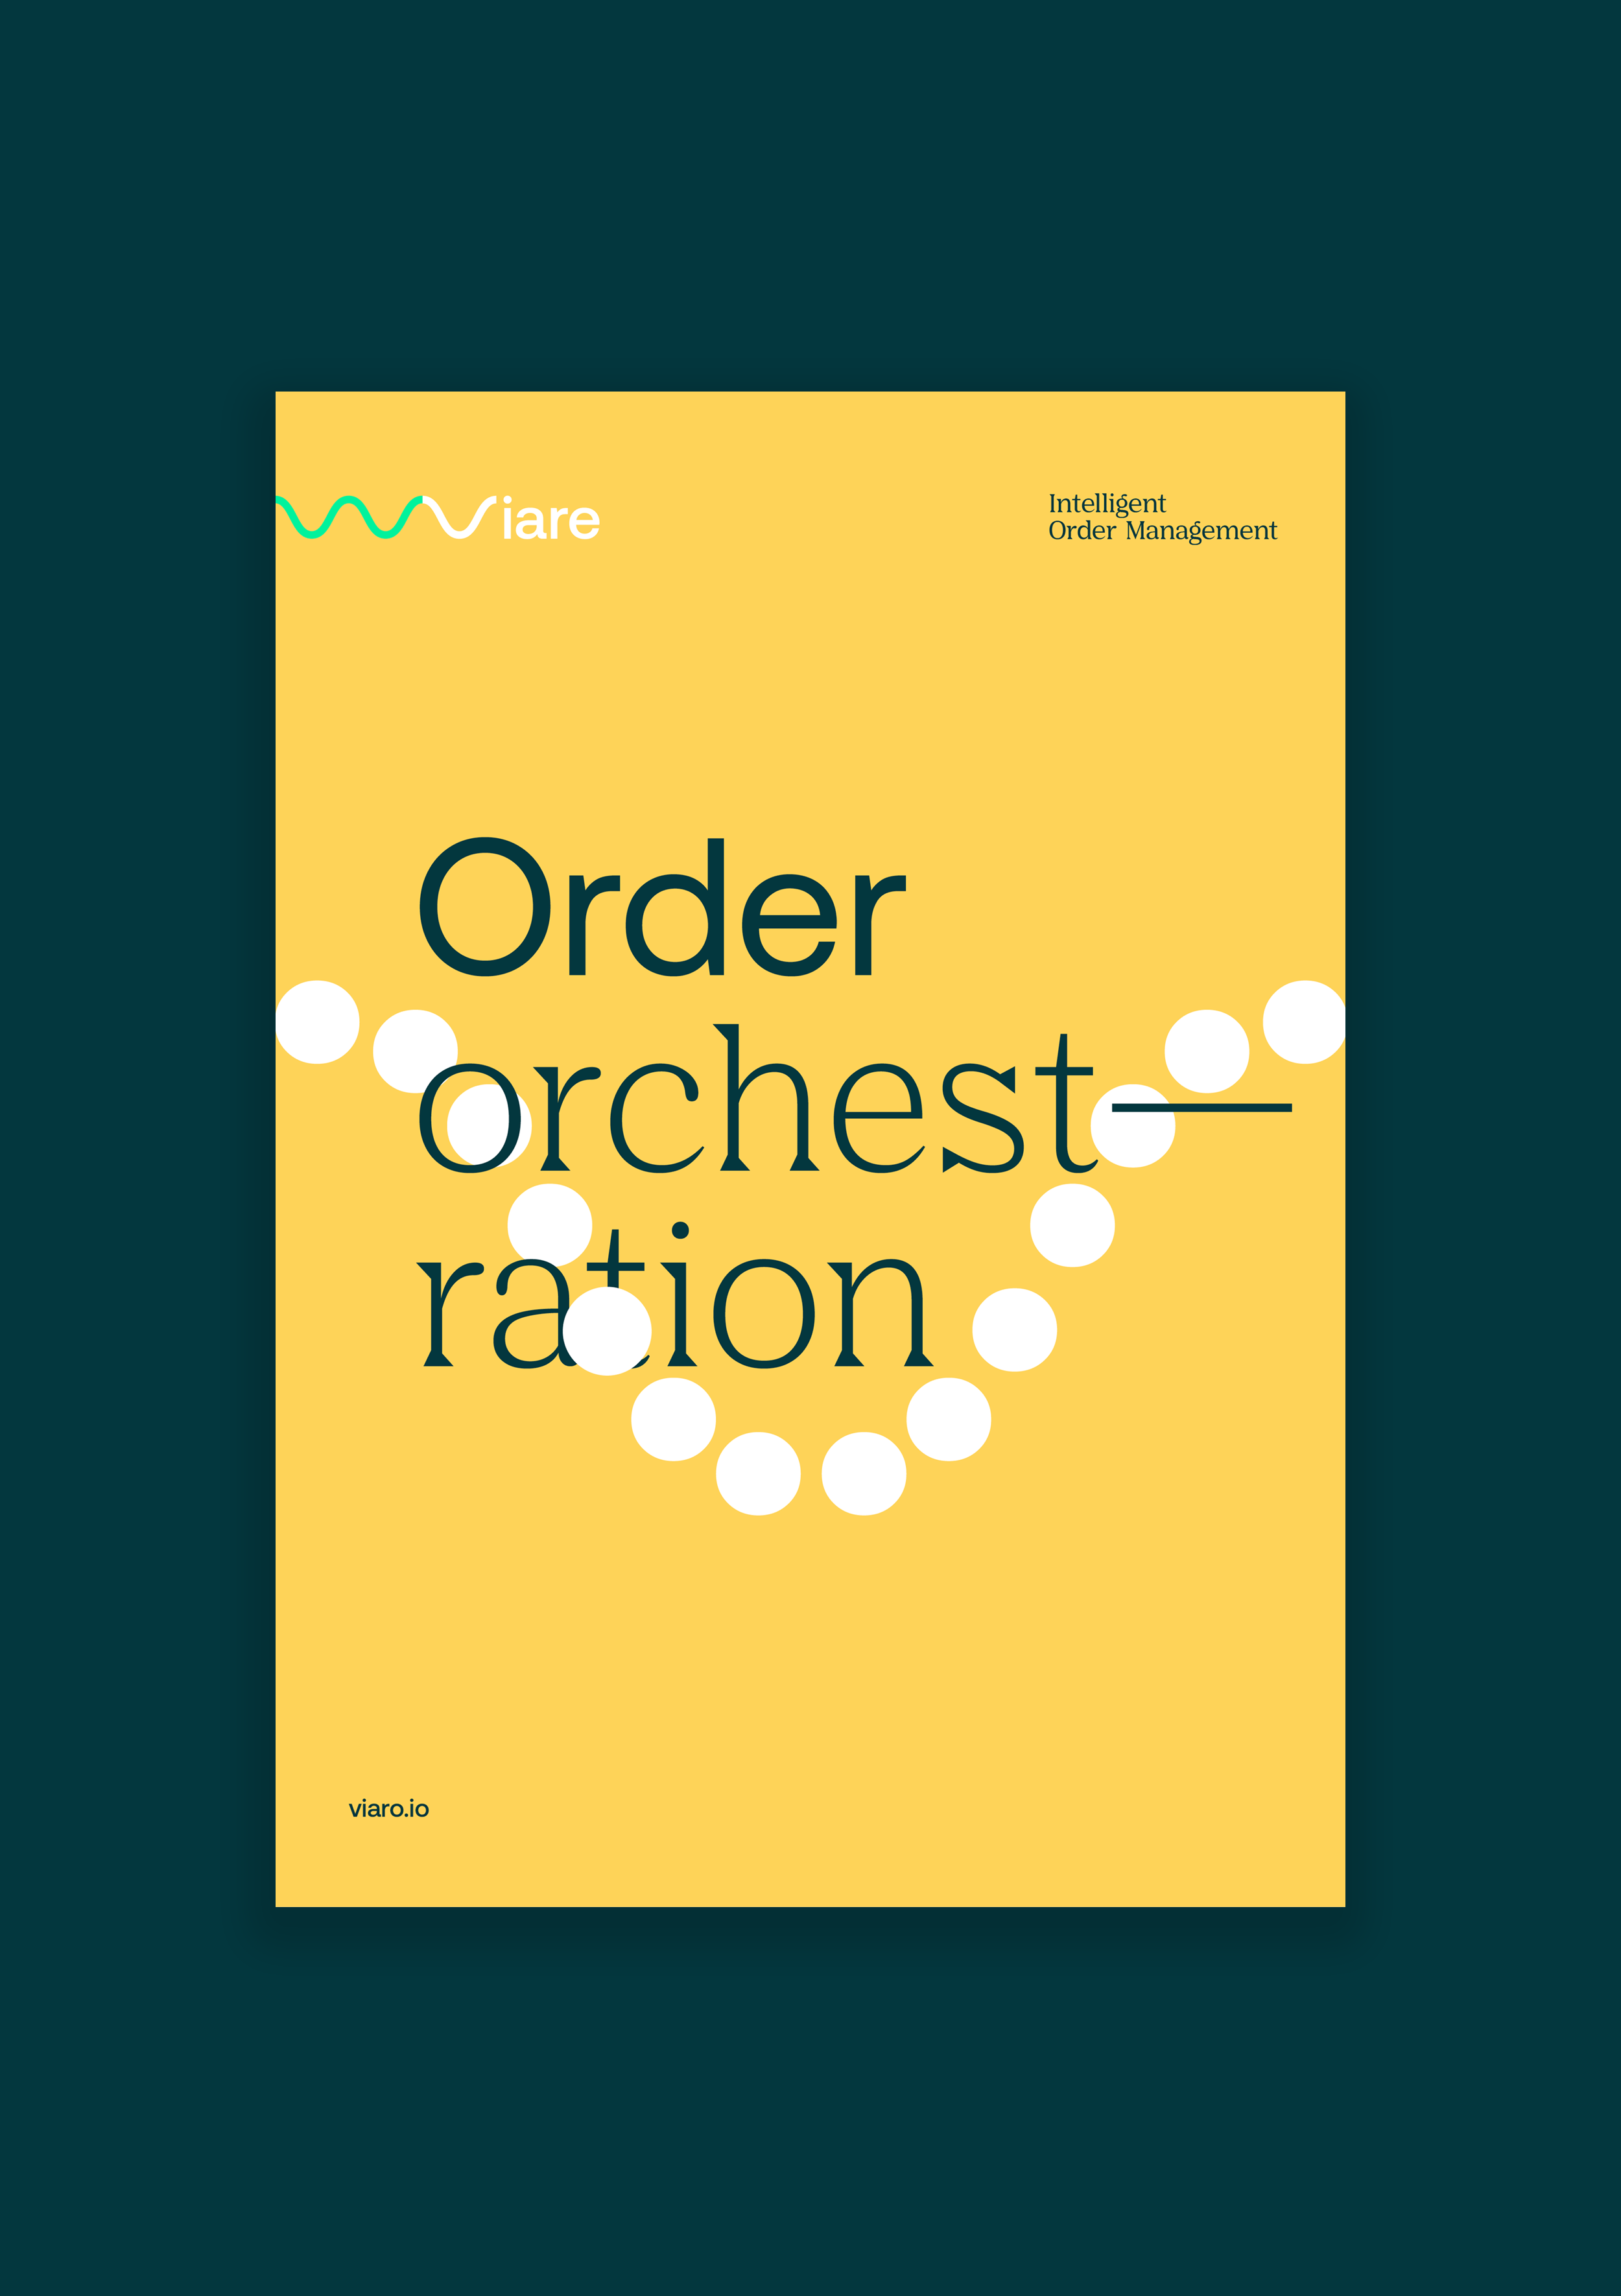 viare poster saying Order orchestration